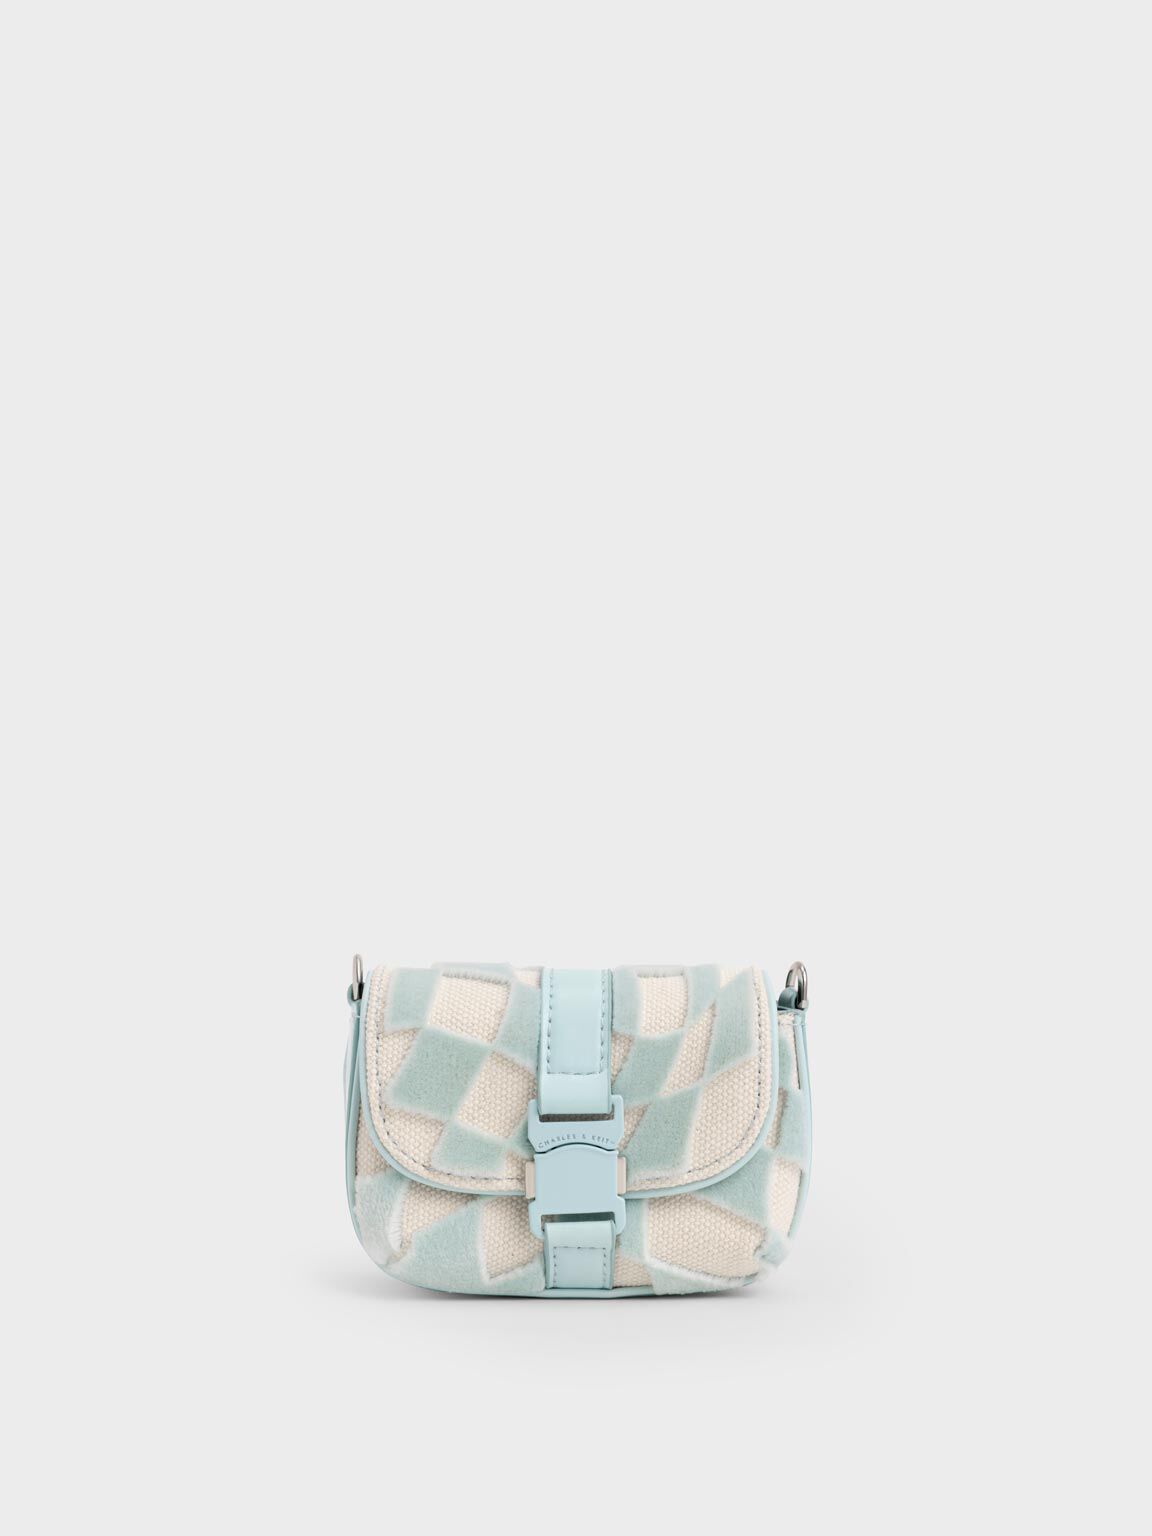 White And Grey Women Checkered PU Leather Sling Bag, Size: 9 X 6 X 3 Inches